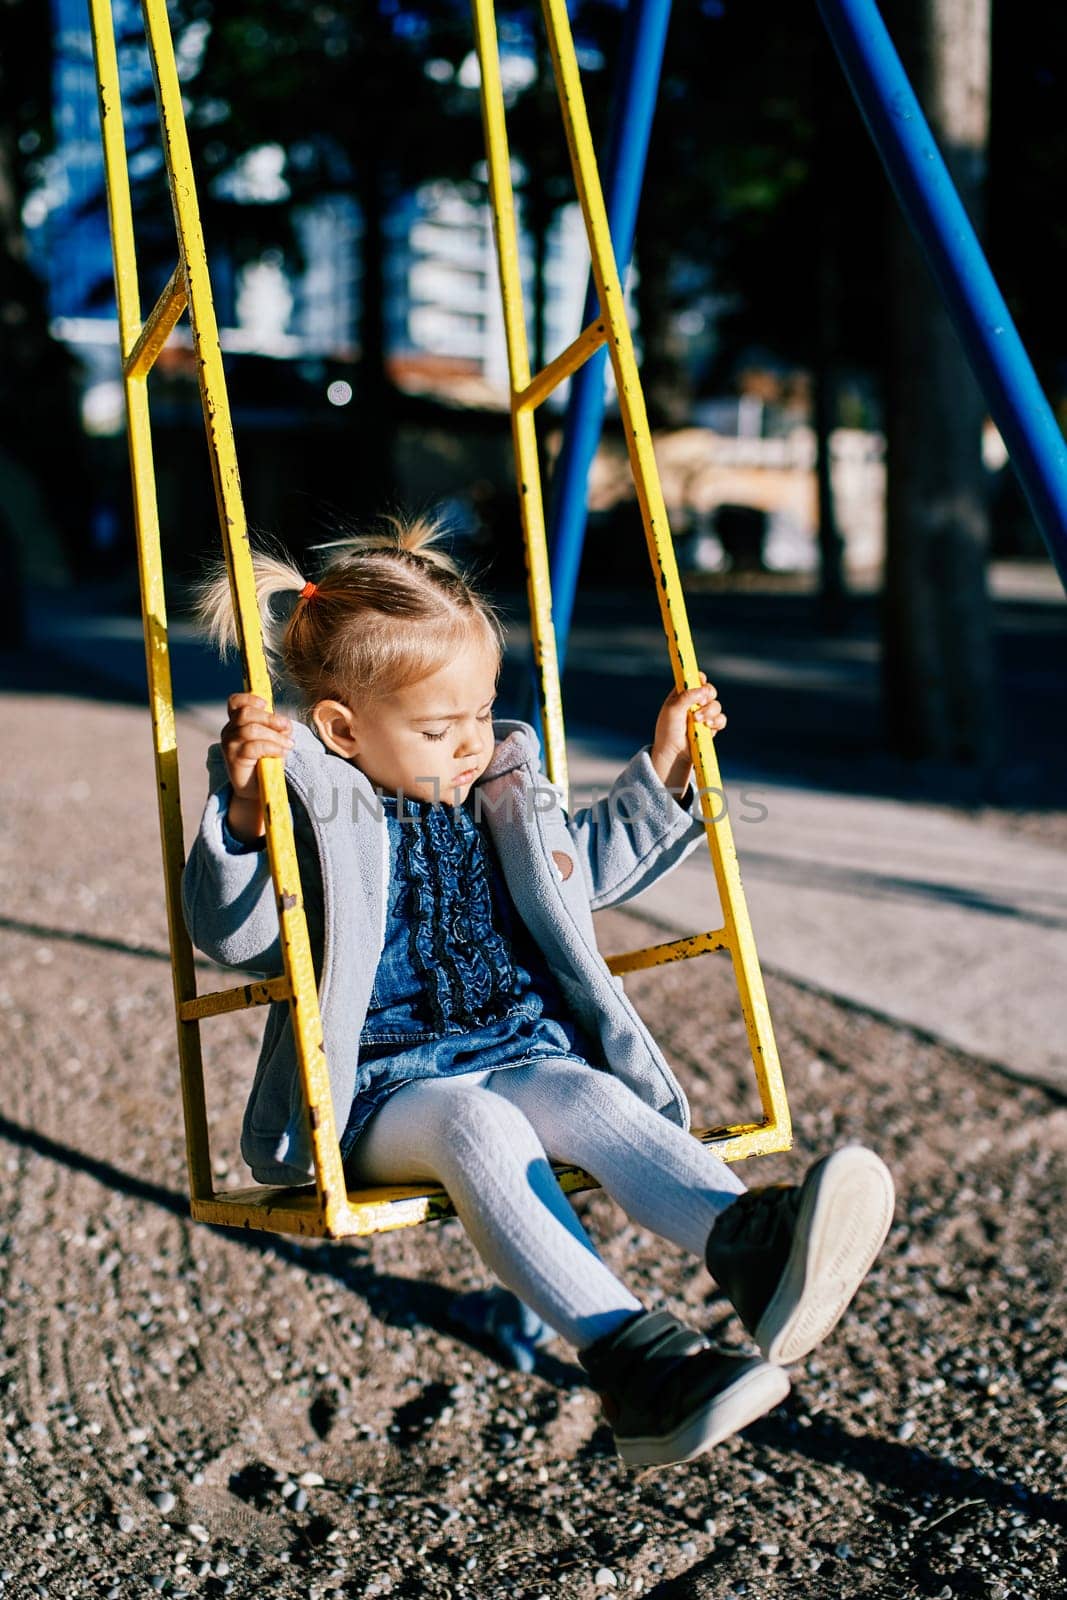 Little girl swinging on a swing holding on to the handrails. High quality photo